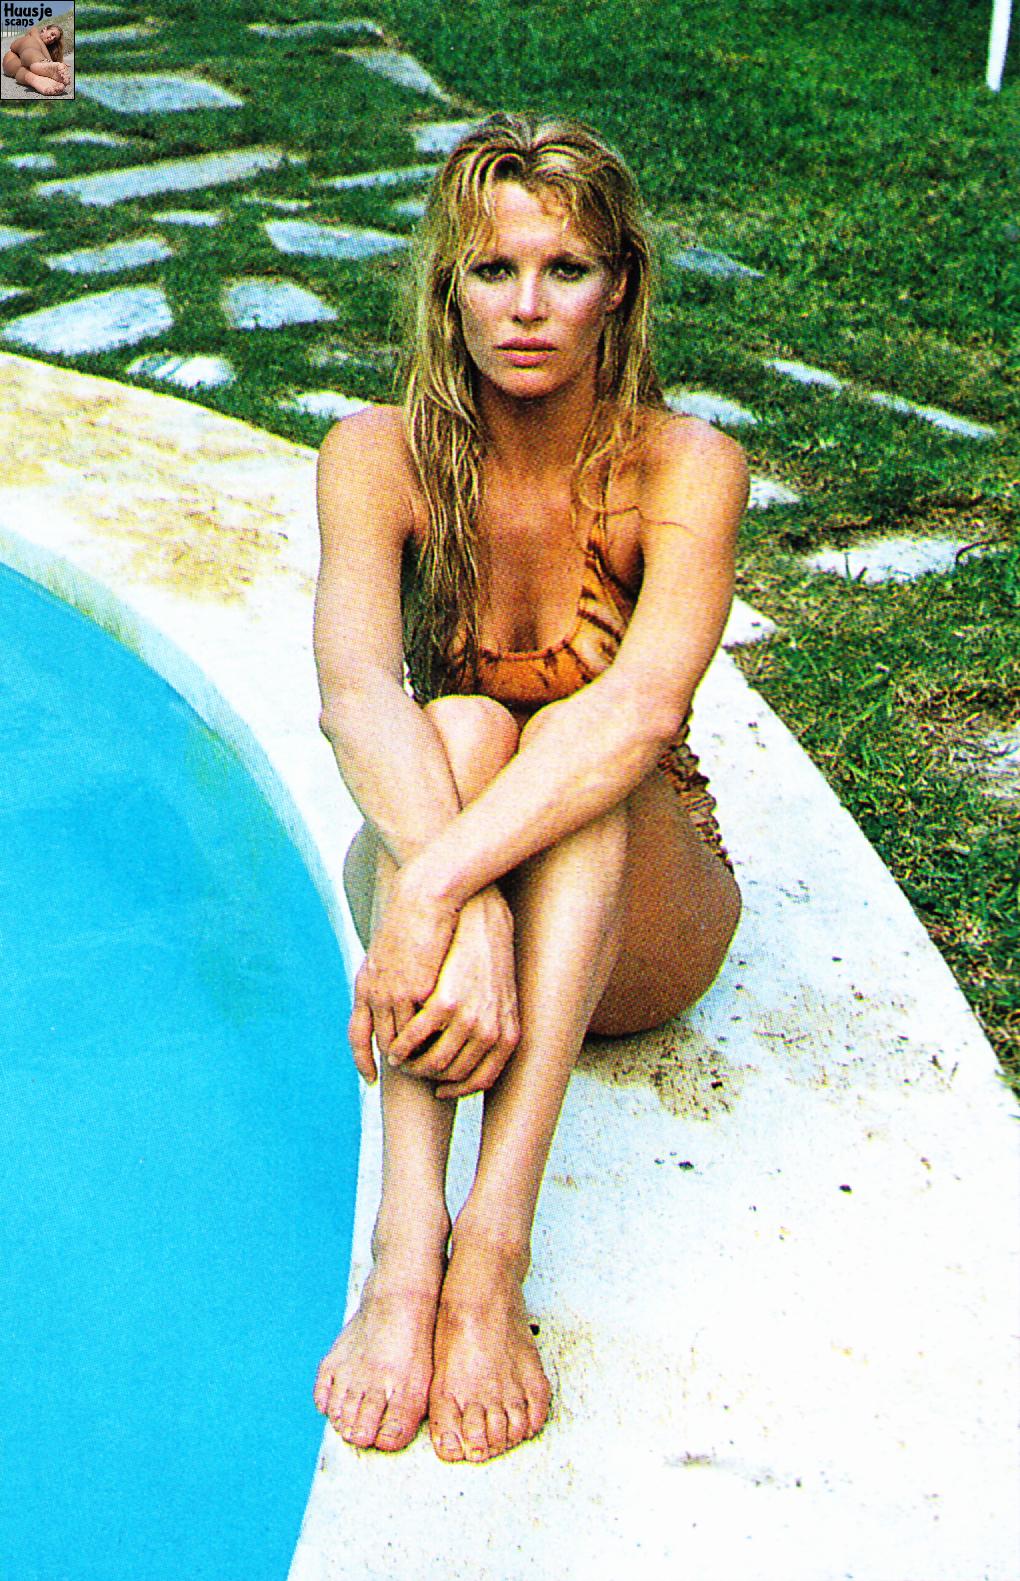 People who liked Kim Basinger's feet, also liked.